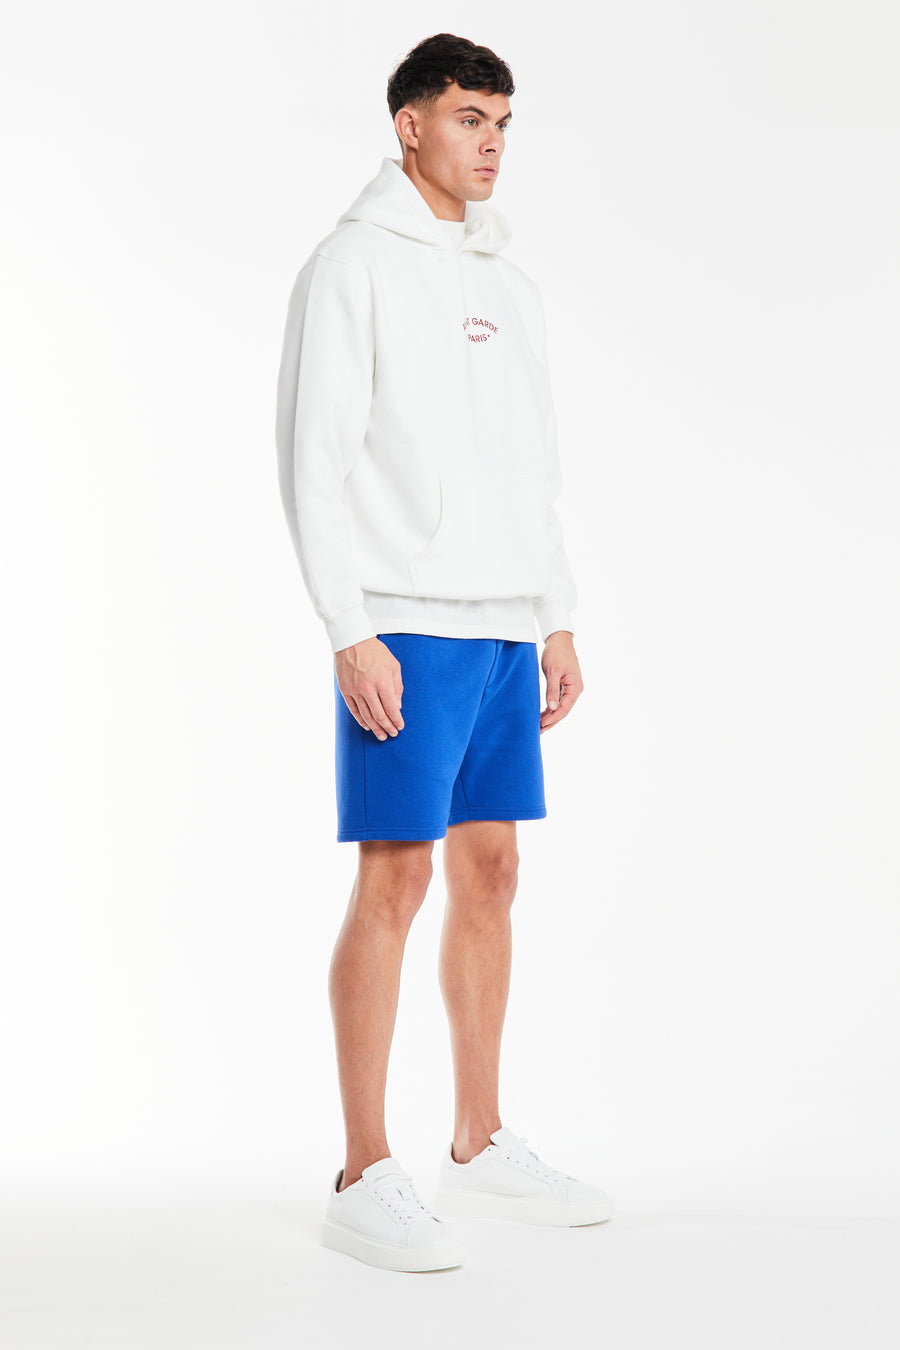 White men's hoodie with cuffed sleeves styled with shorts